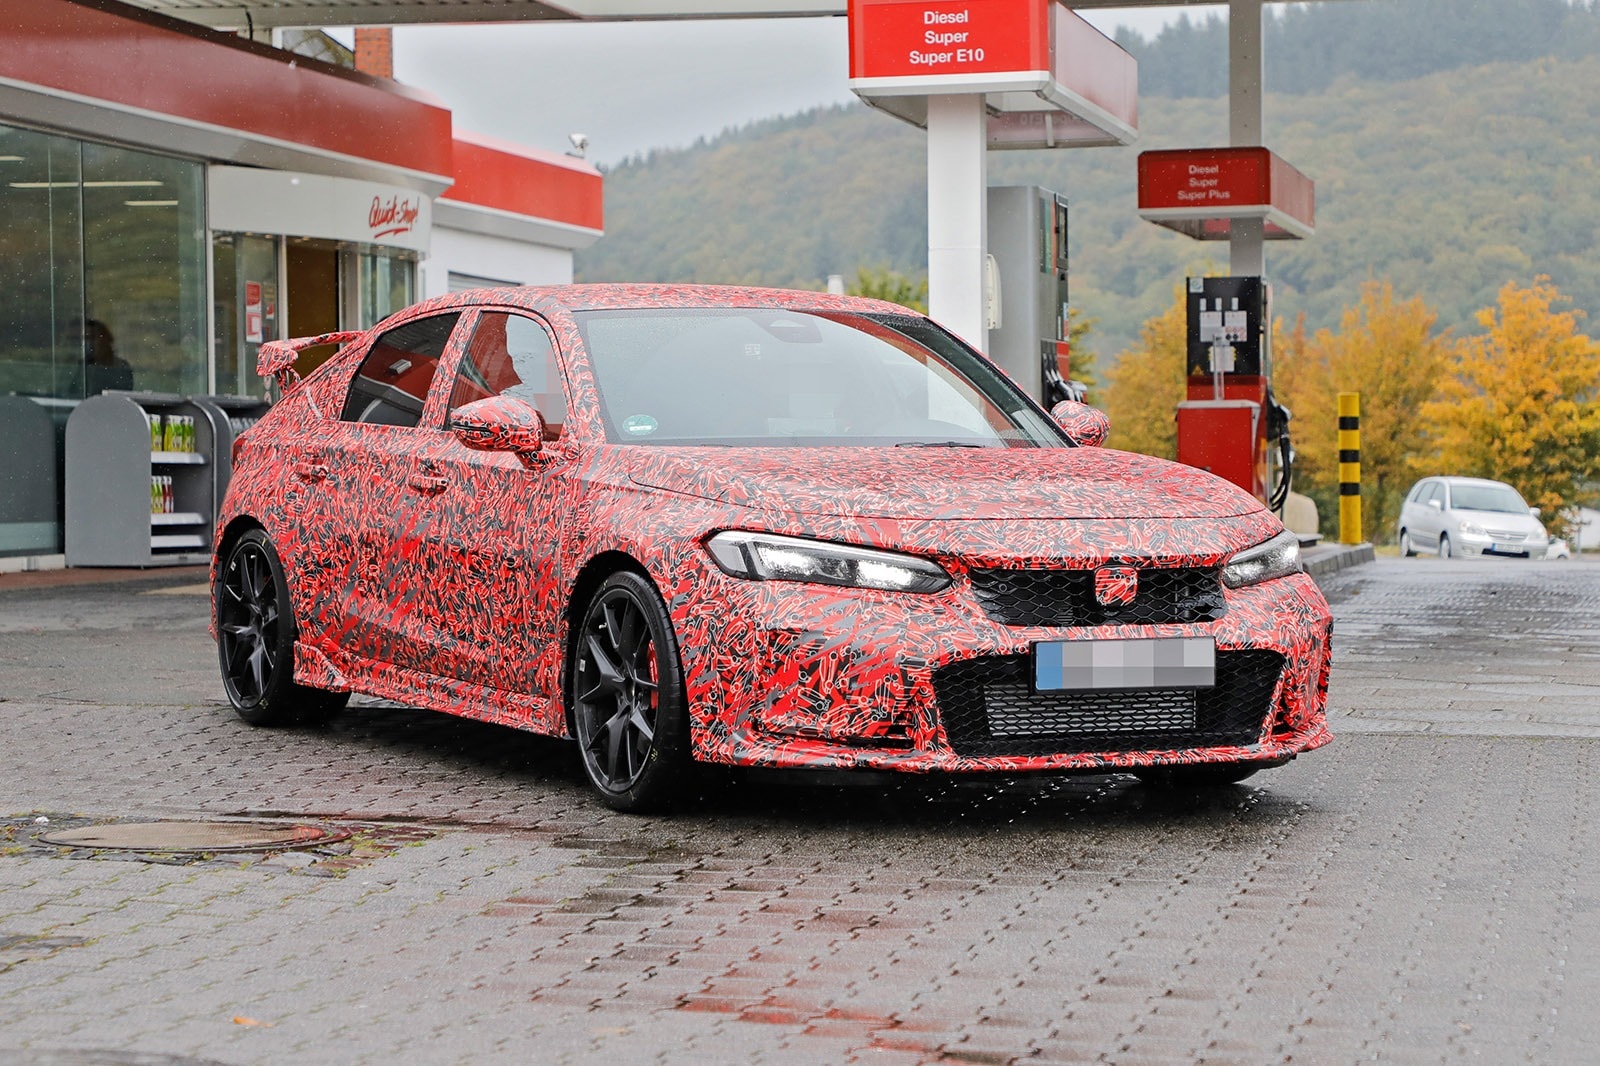 2023 Civic Type R Spy Shots Reveal Shift Knob, New Interior and Much More